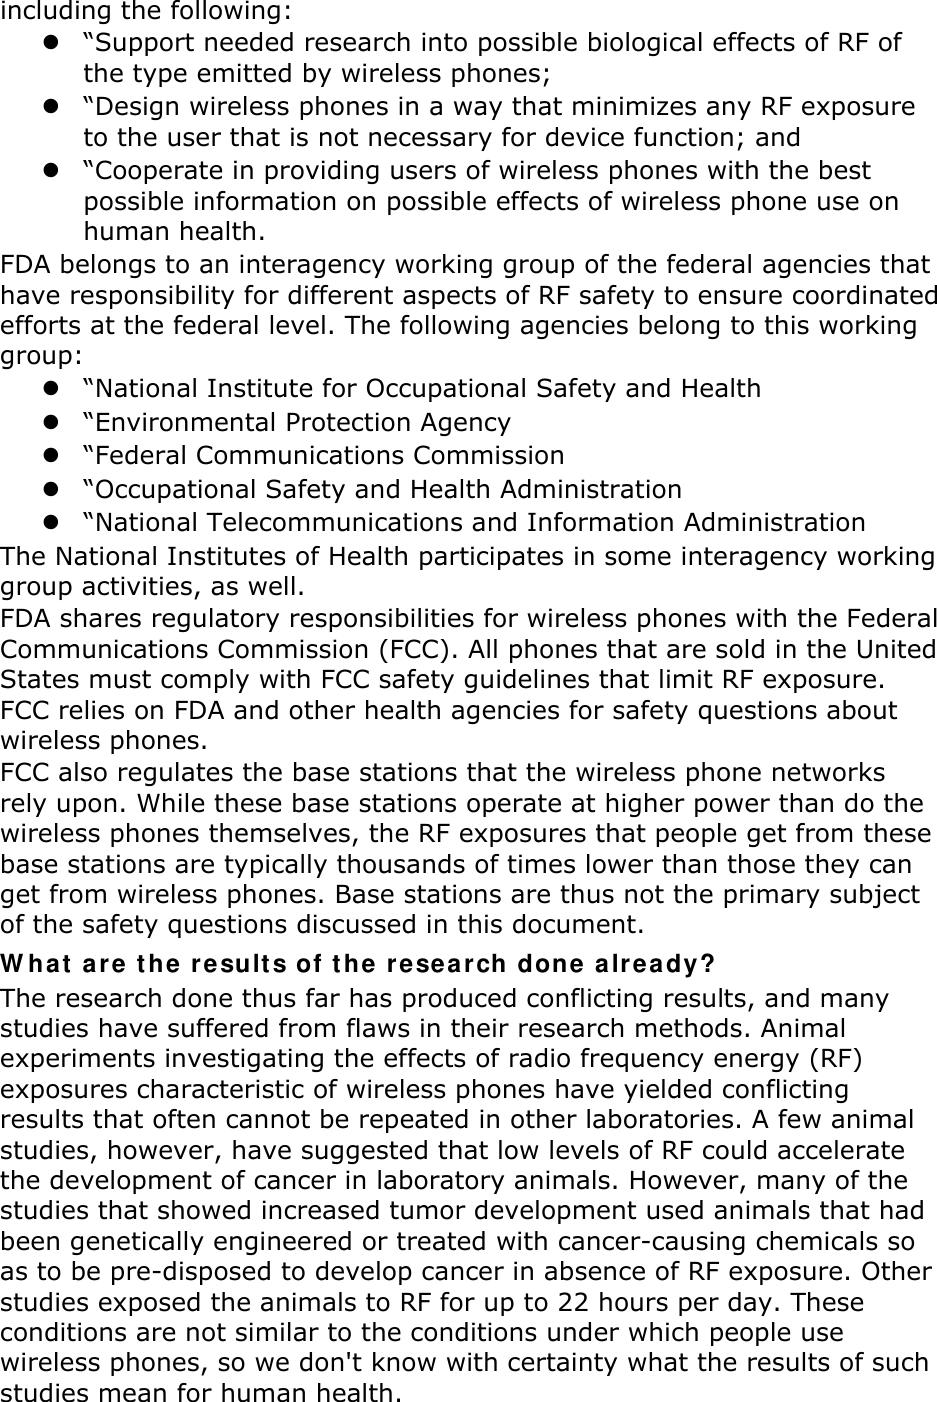 including the following:  “Support needed research into possible biological effects of RF of the type emitted by wireless phones;  “Design wireless phones in a way that minimizes any RF exposure to the user that is not necessary for device function; and  “Cooperate in providing users of wireless phones with the best possible information on possible effects of wireless phone use on human health. FDA belongs to an interagency working group of the federal agencies that have responsibility for different aspects of RF safety to ensure coordinated efforts at the federal level. The following agencies belong to this working group:  “National Institute for Occupational Safety and Health  “Environmental Protection Agency  “Federal Communications Commission  “Occupational Safety and Health Administration  “National Telecommunications and Information Administration The National Institutes of Health participates in some interagency working group activities, as well. FDA shares regulatory responsibilities for wireless phones with the Federal Communications Commission (FCC). All phones that are sold in the United States must comply with FCC safety guidelines that limit RF exposure. FCC relies on FDA and other health agencies for safety questions about wireless phones. FCC also regulates the base stations that the wireless phone networks rely upon. While these base stations operate at higher power than do the wireless phones themselves, the RF exposures that people get from these base stations are typically thousands of times lower than those they can get from wireless phones. Base stations are thus not the primary subject of the safety questions discussed in this document. W ha t  a r e  t he r e sult s of t he r e search done a lr e a dy? The research done thus far has produced conflicting results, and many studies have suffered from flaws in their research methods. Animal experiments investigating the effects of radio frequency energy (RF) exposures characteristic of wireless phones have yielded conflicting results that often cannot be repeated in other laboratories. A few animal studies, however, have suggested that low levels of RF could accelerate the development of cancer in laboratory animals. However, many of the studies that showed increased tumor development used animals that had been genetically engineered or treated with cancer-causing chemicals so as to be pre-disposed to develop cancer in absence of RF exposure. Other studies exposed the animals to RF for up to 22 hours per day. These conditions are not similar to the conditions under which people use wireless phones, so we don&apos;t know with certainty what the results of such studies mean for human health. 